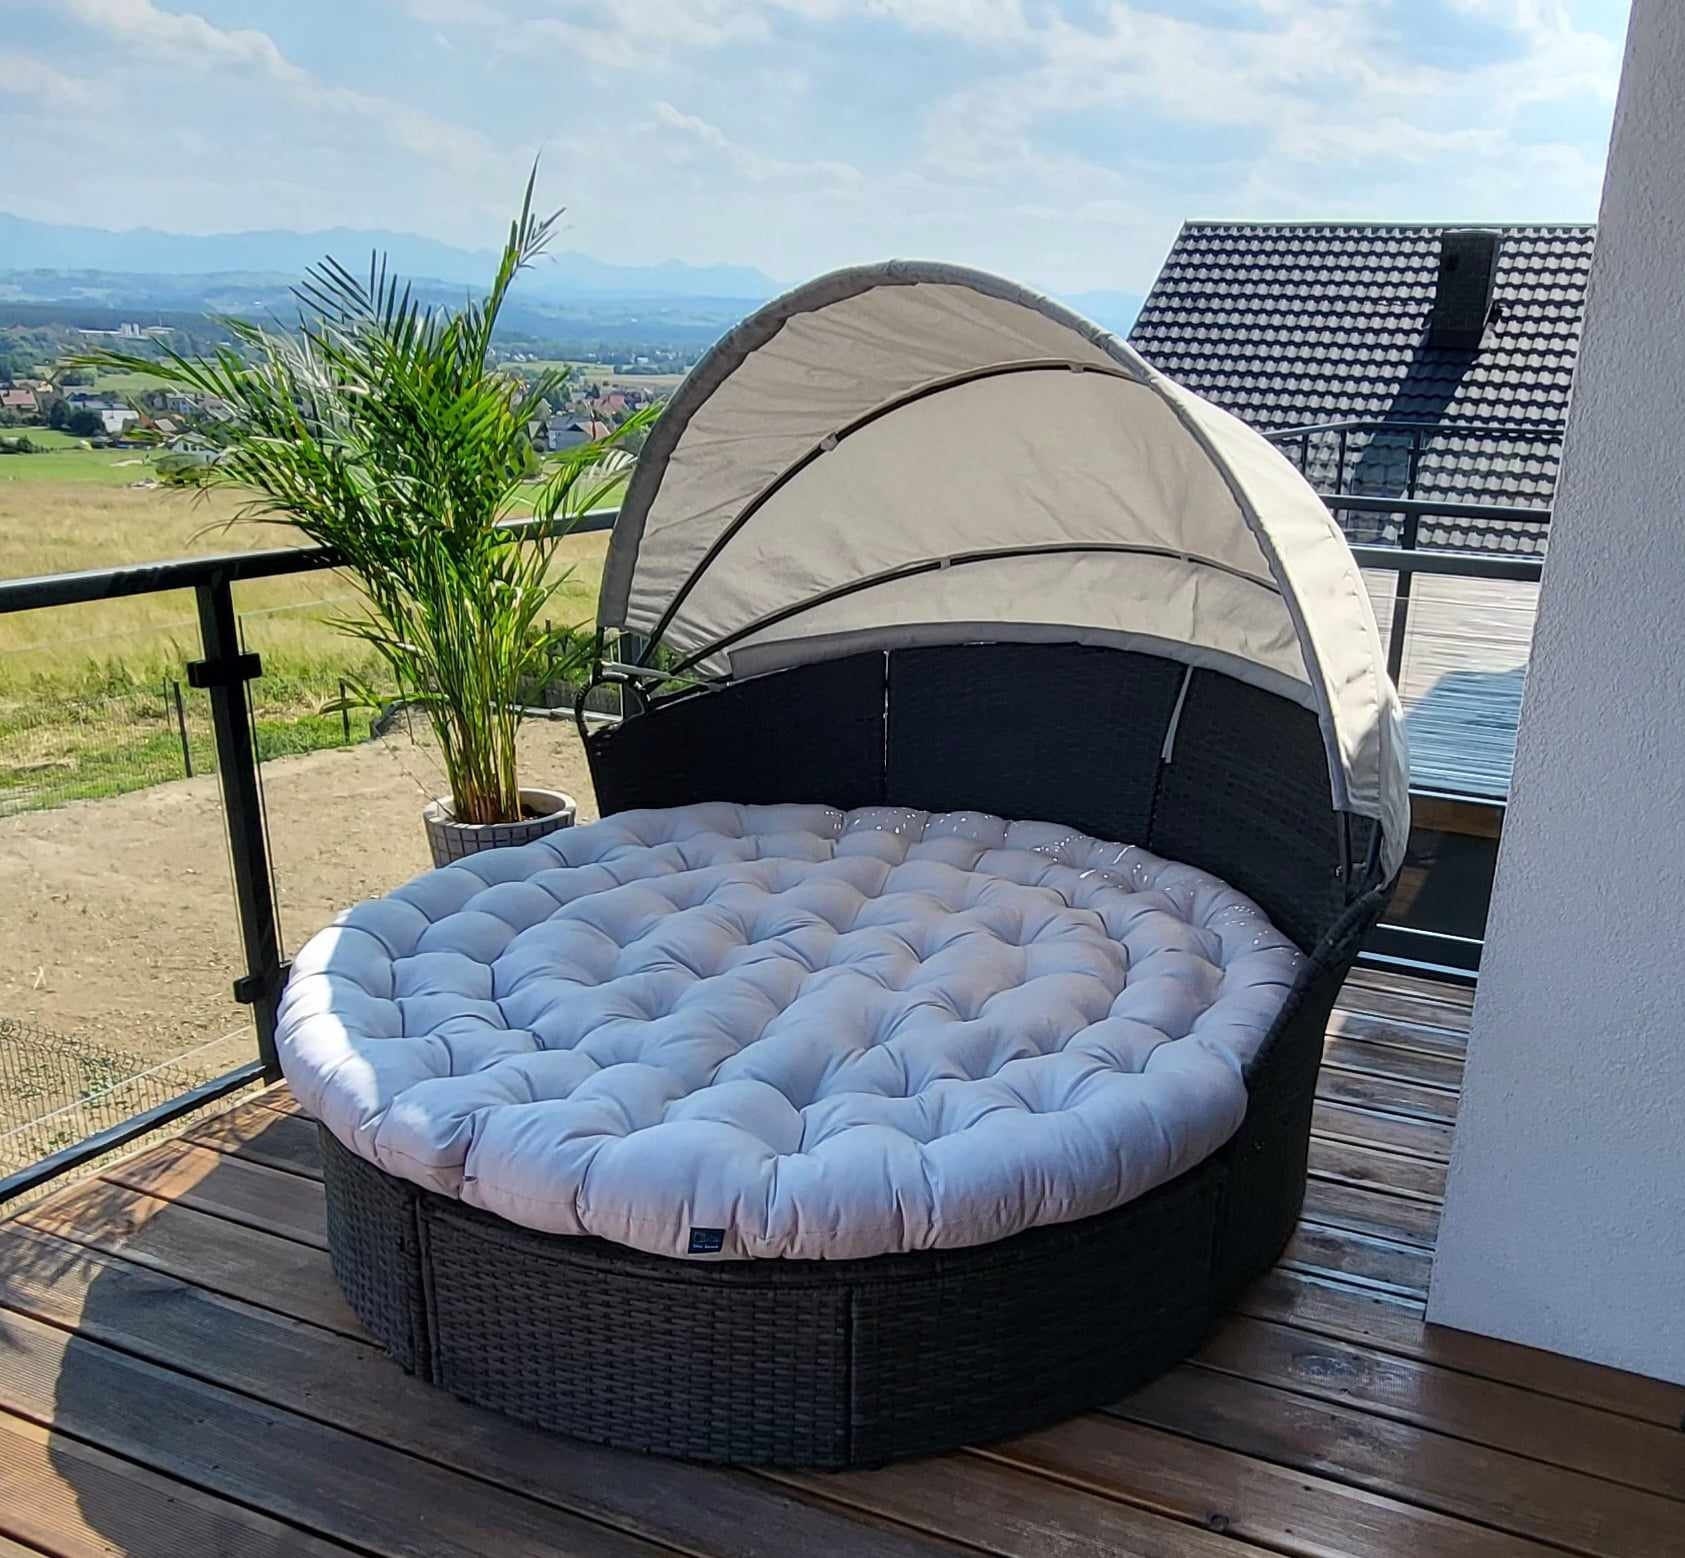 Water Resistant Floor Cushion Round Seat Cushion Large Size Outdoor Floor  Pad Round Garden Patio Pillow Futon PAD for Balcony 